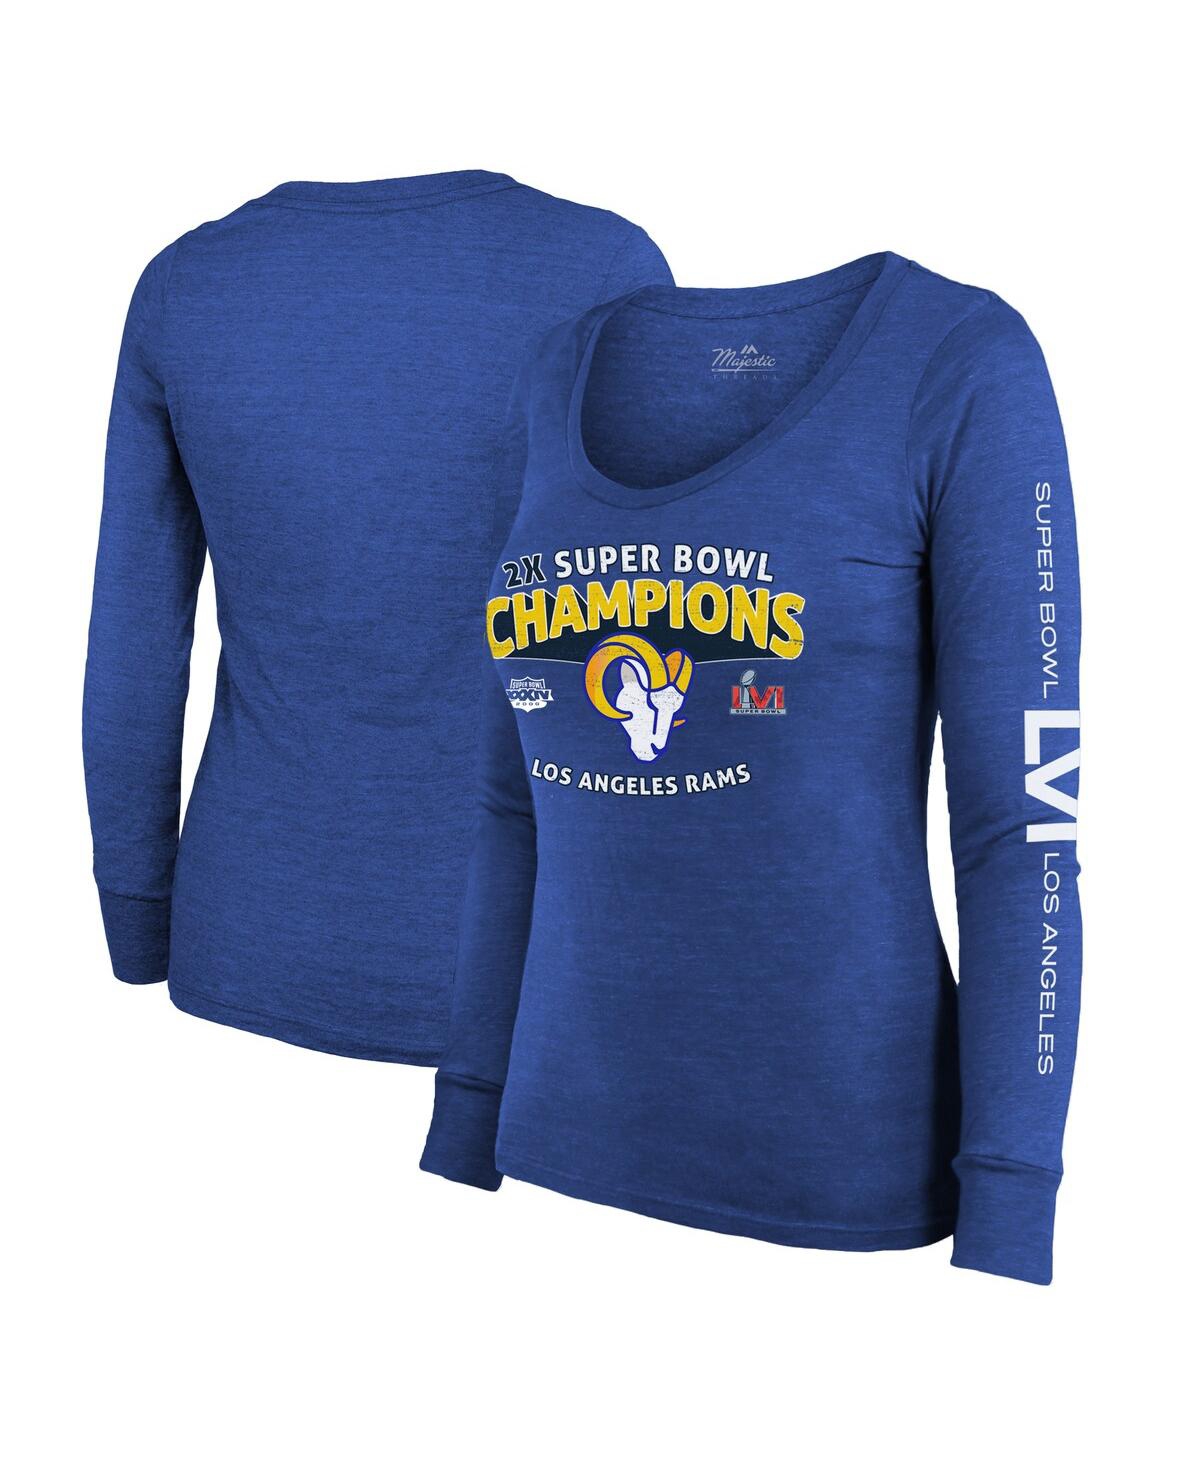 Women's Majestic Threads Heather Royal Los Angeles Rams 2-Time Super Bowl Champions Sky High Tri-Blend Long Sleeve Scoop Neck T-shirt - Heathered Roya